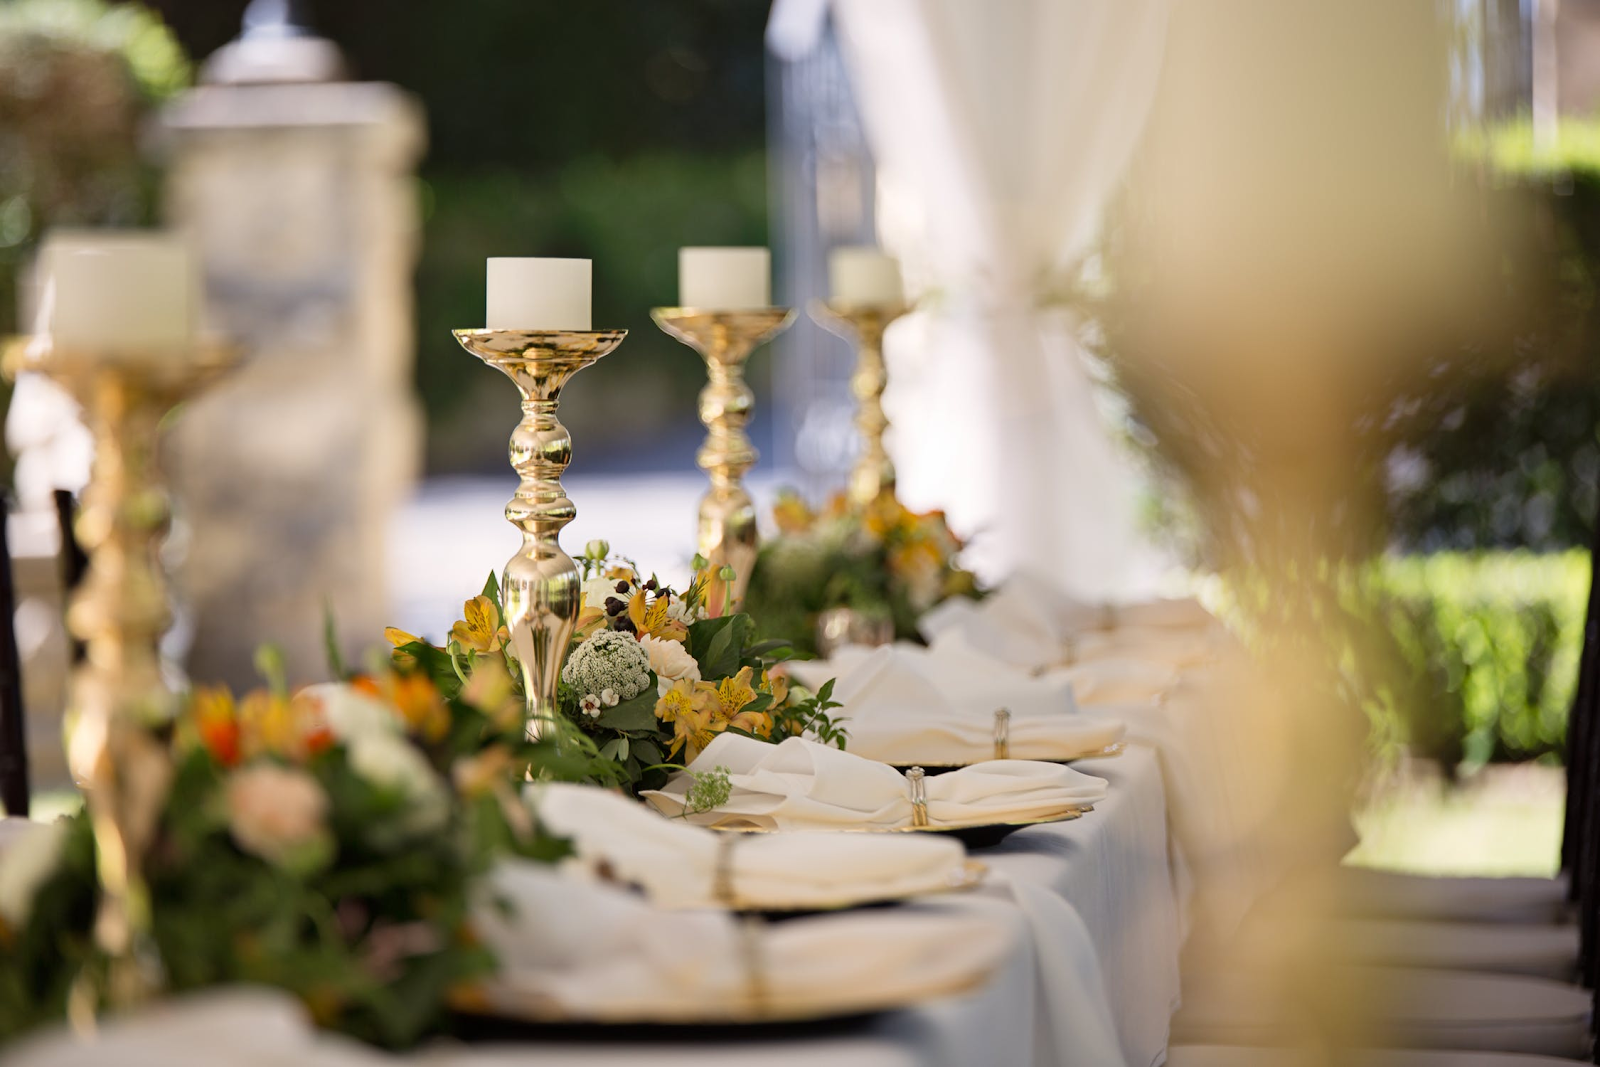 A table set for a wedding reception